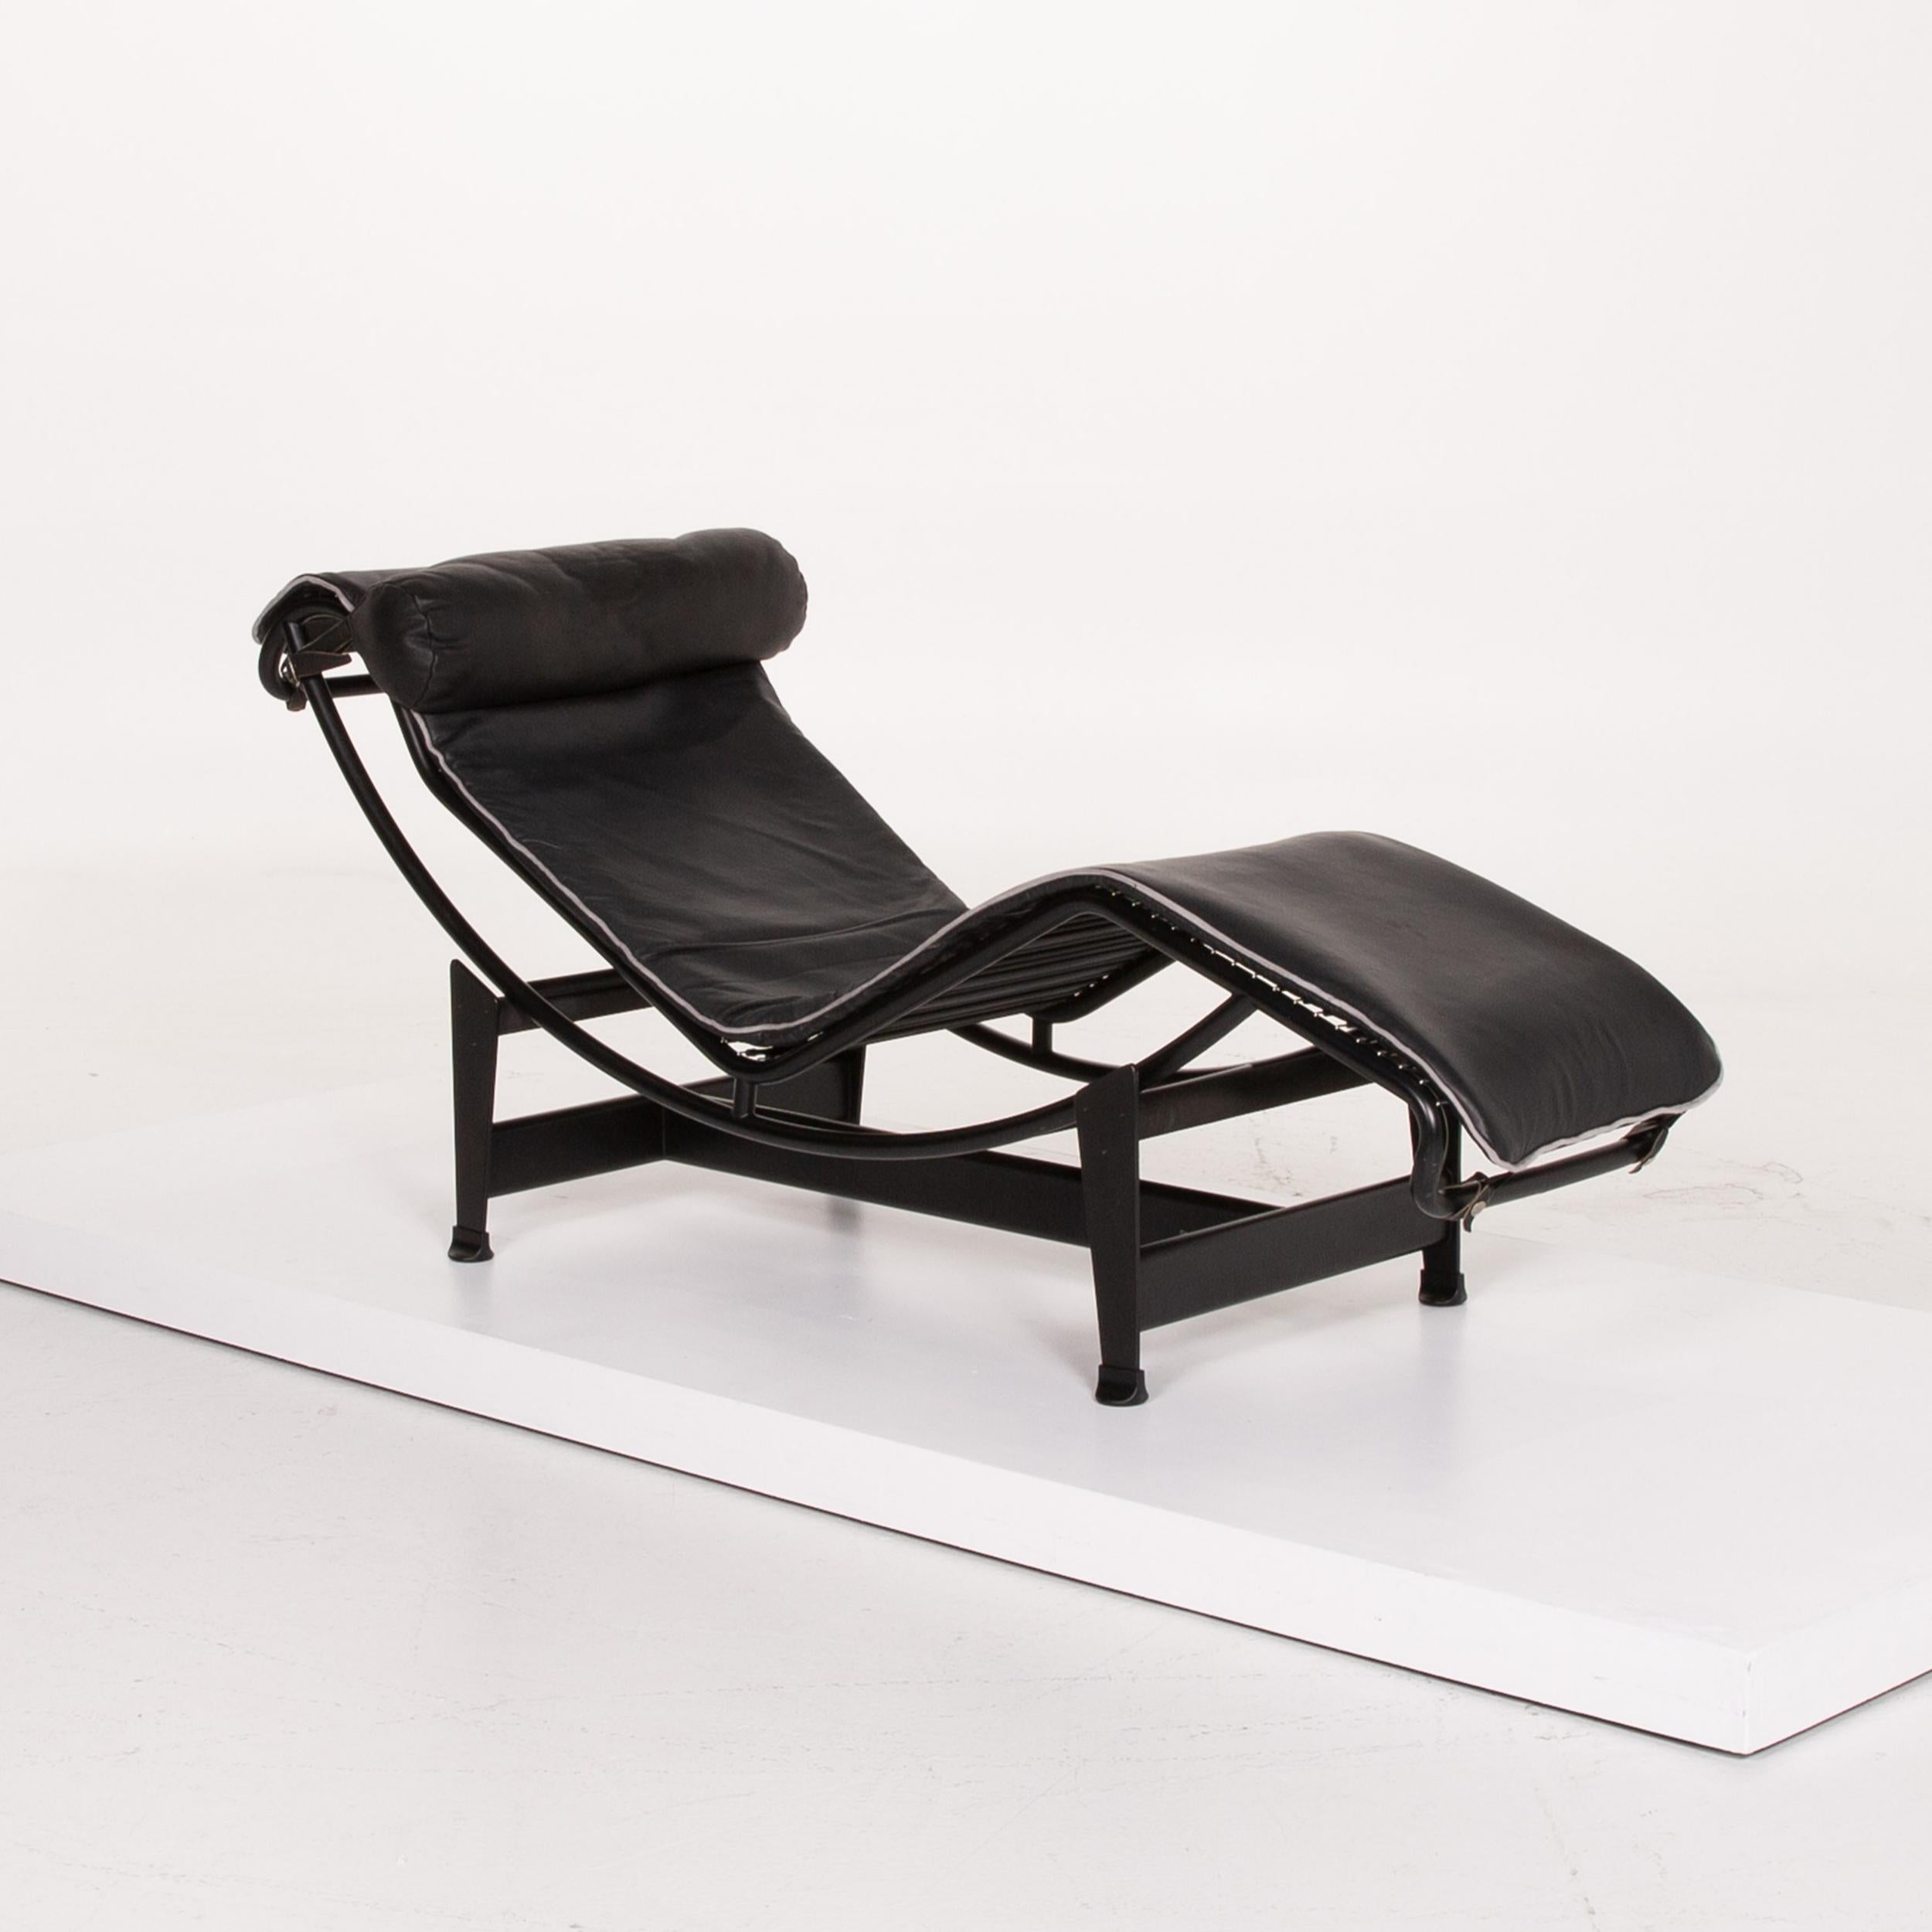 Cassina Le Corbusier LC 4 Leather Lounger Black Relaxation Function Relaxation 2